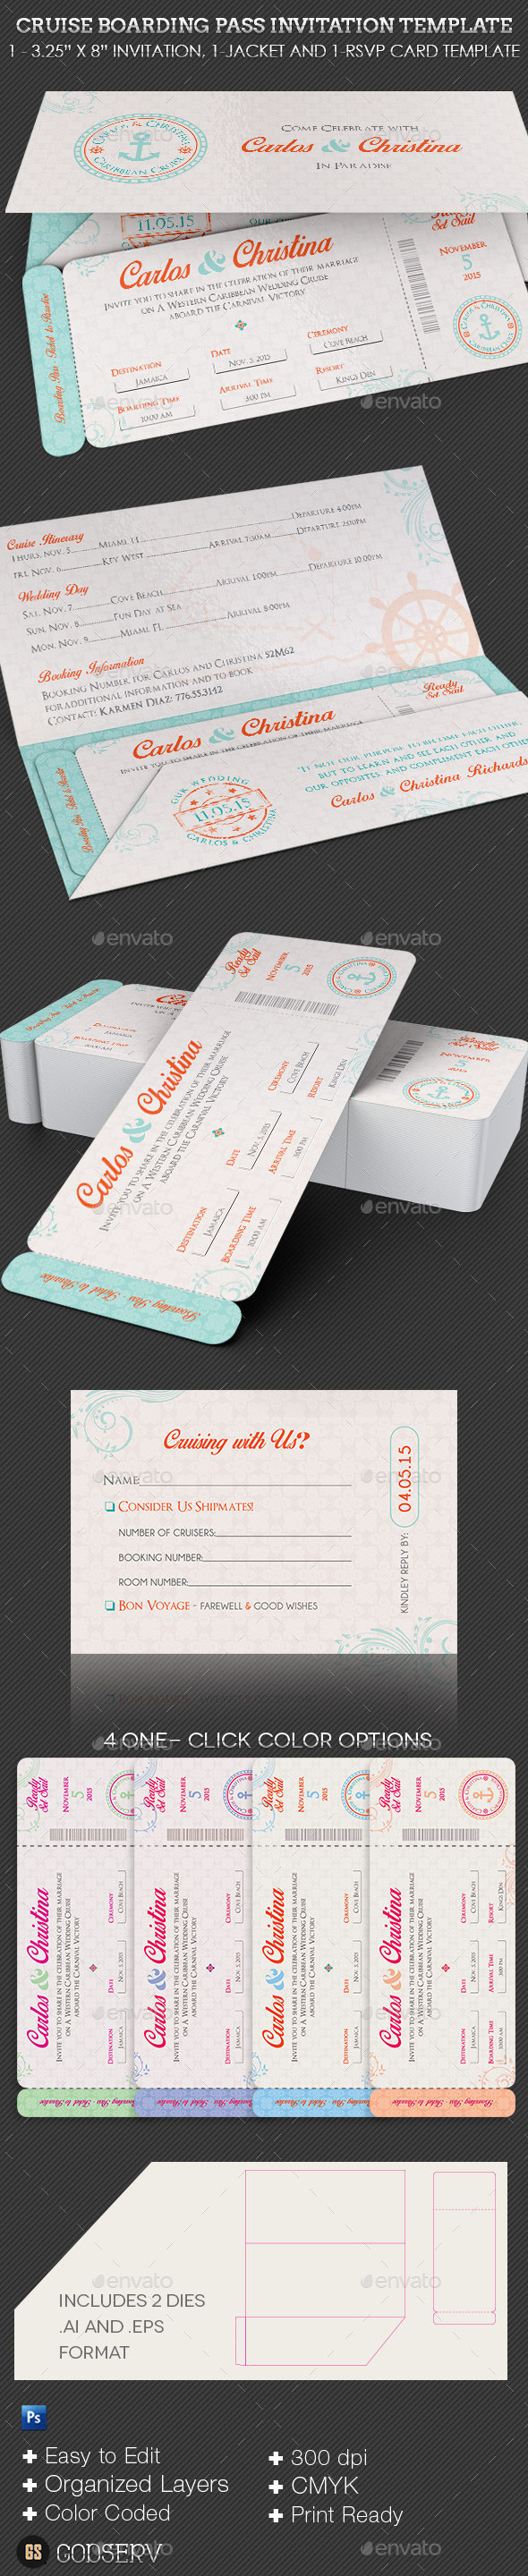 Cruise boarding pass invitation template preview